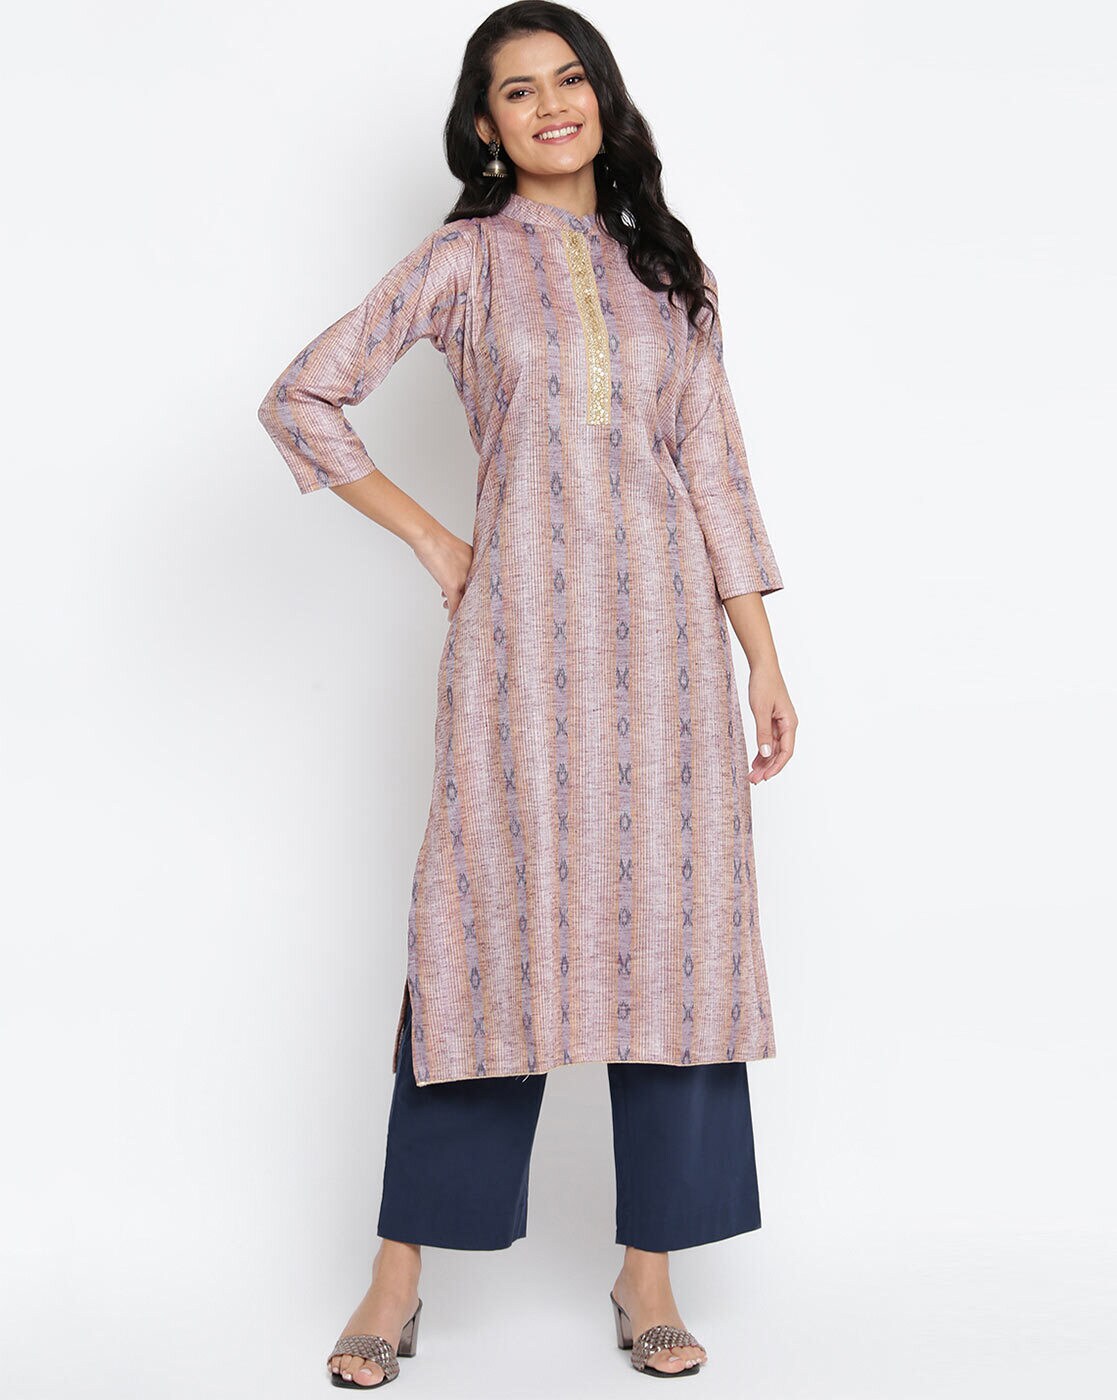 Buy Indian Wear Online Grey Cotton Printed Unstitched Kurti Material Online  @ ₹295 from ShopClues